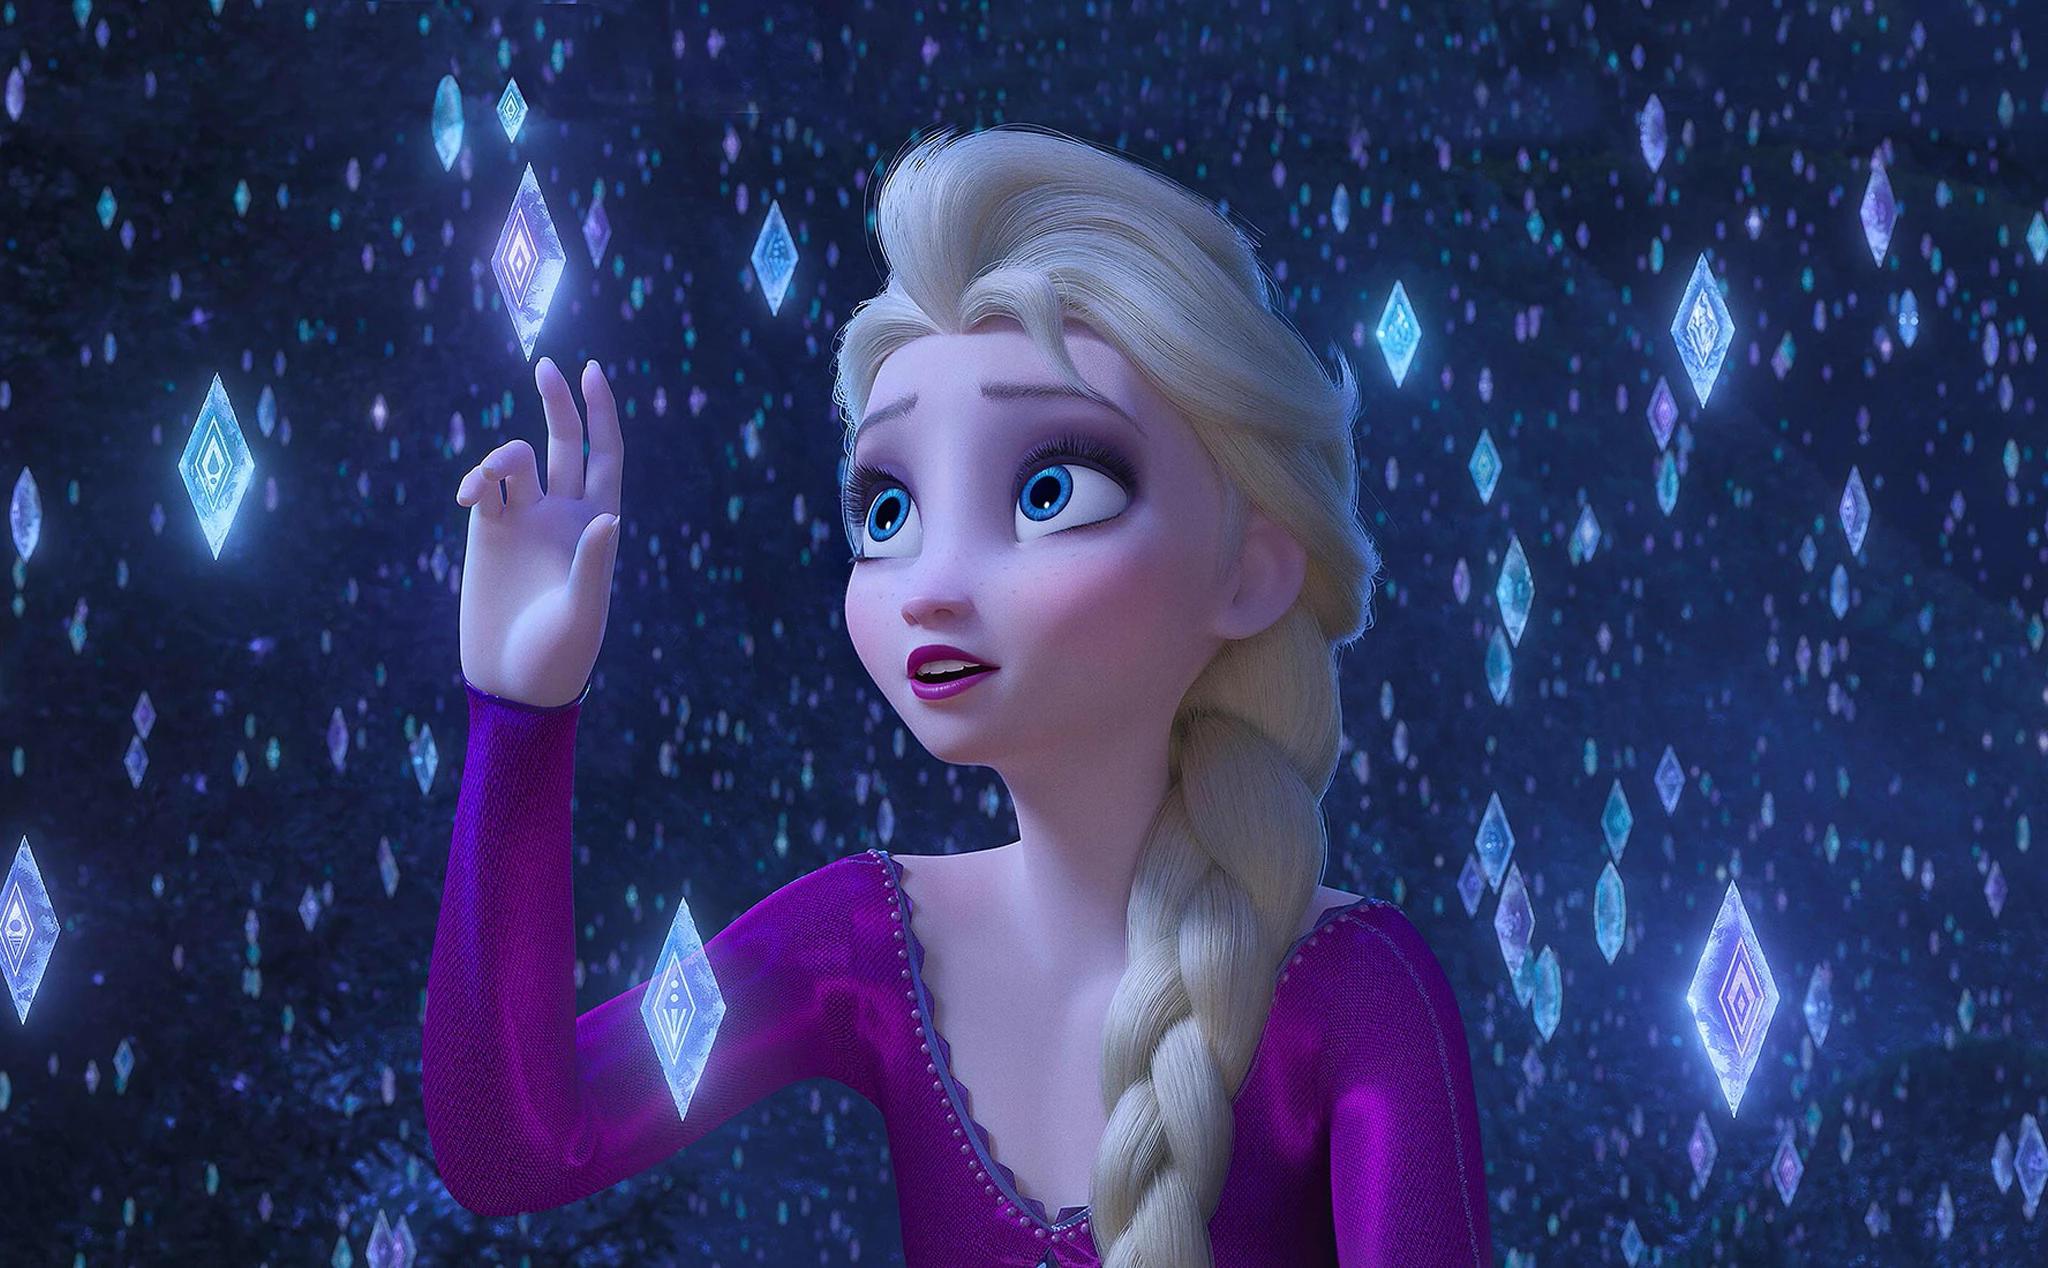 How Long Do We Have To Wait To See Frozen 4?